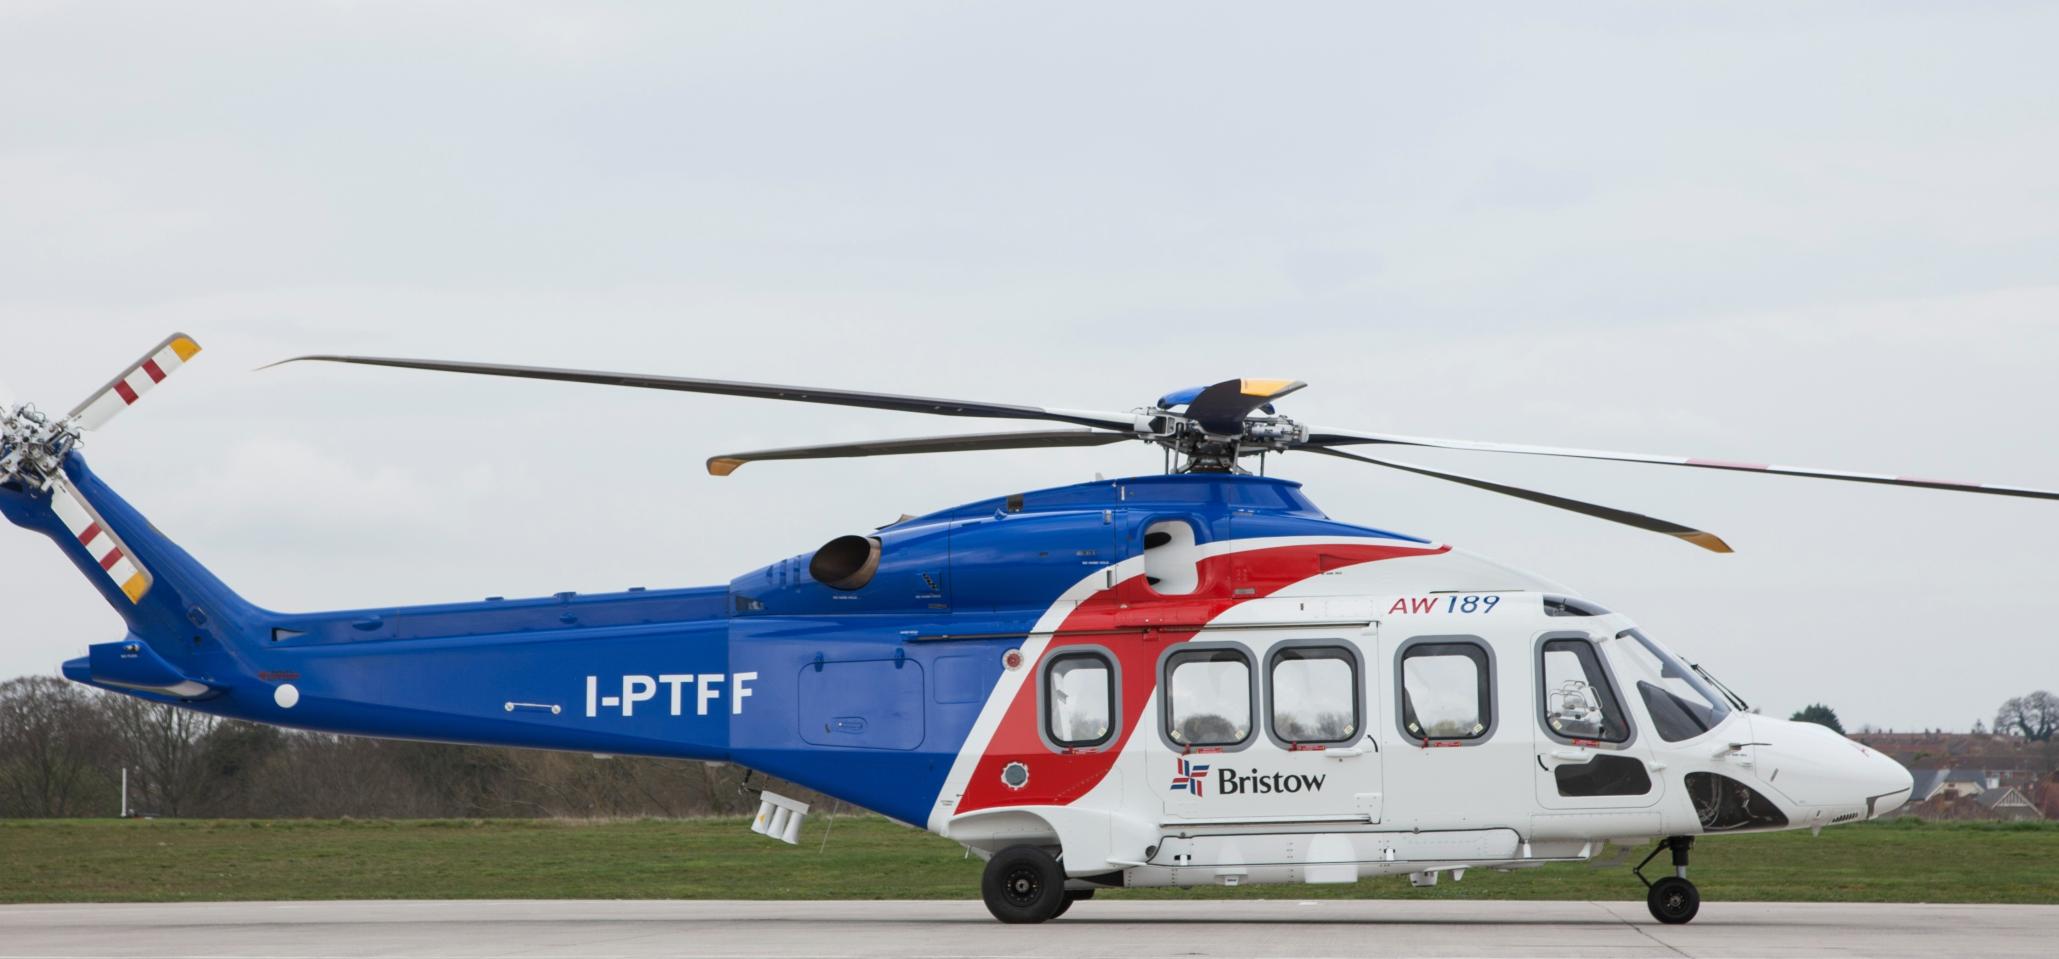 Aw189Offshore-immagine banner (3)